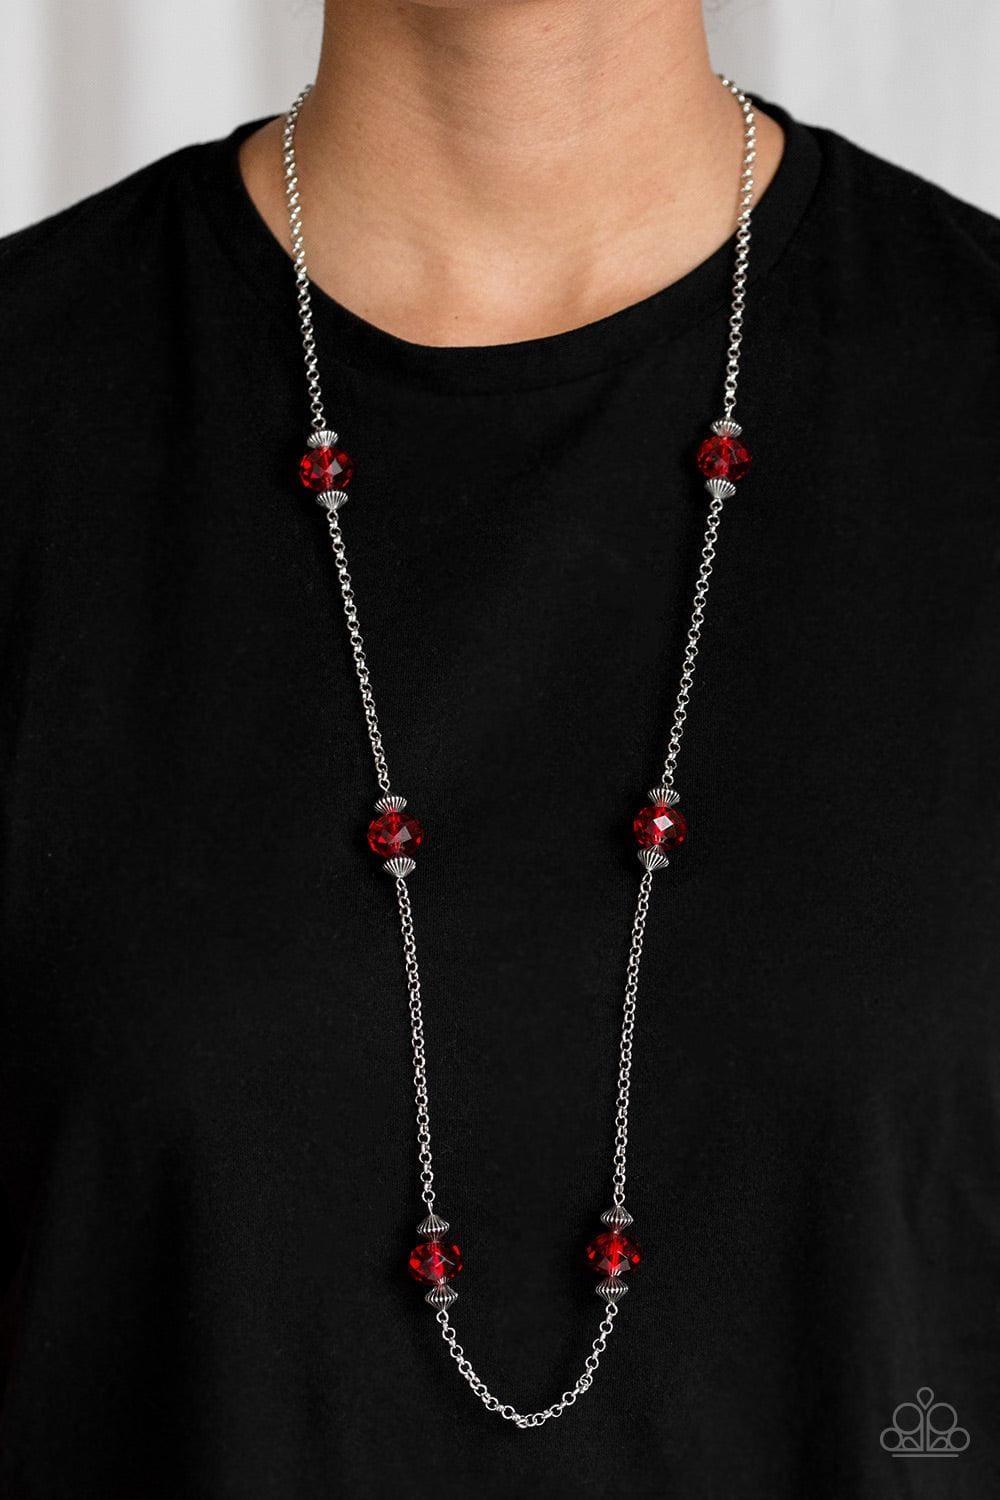 Paparazzi Accessories - Season Of Sparkle - Red Necklace - Bling by JessieK